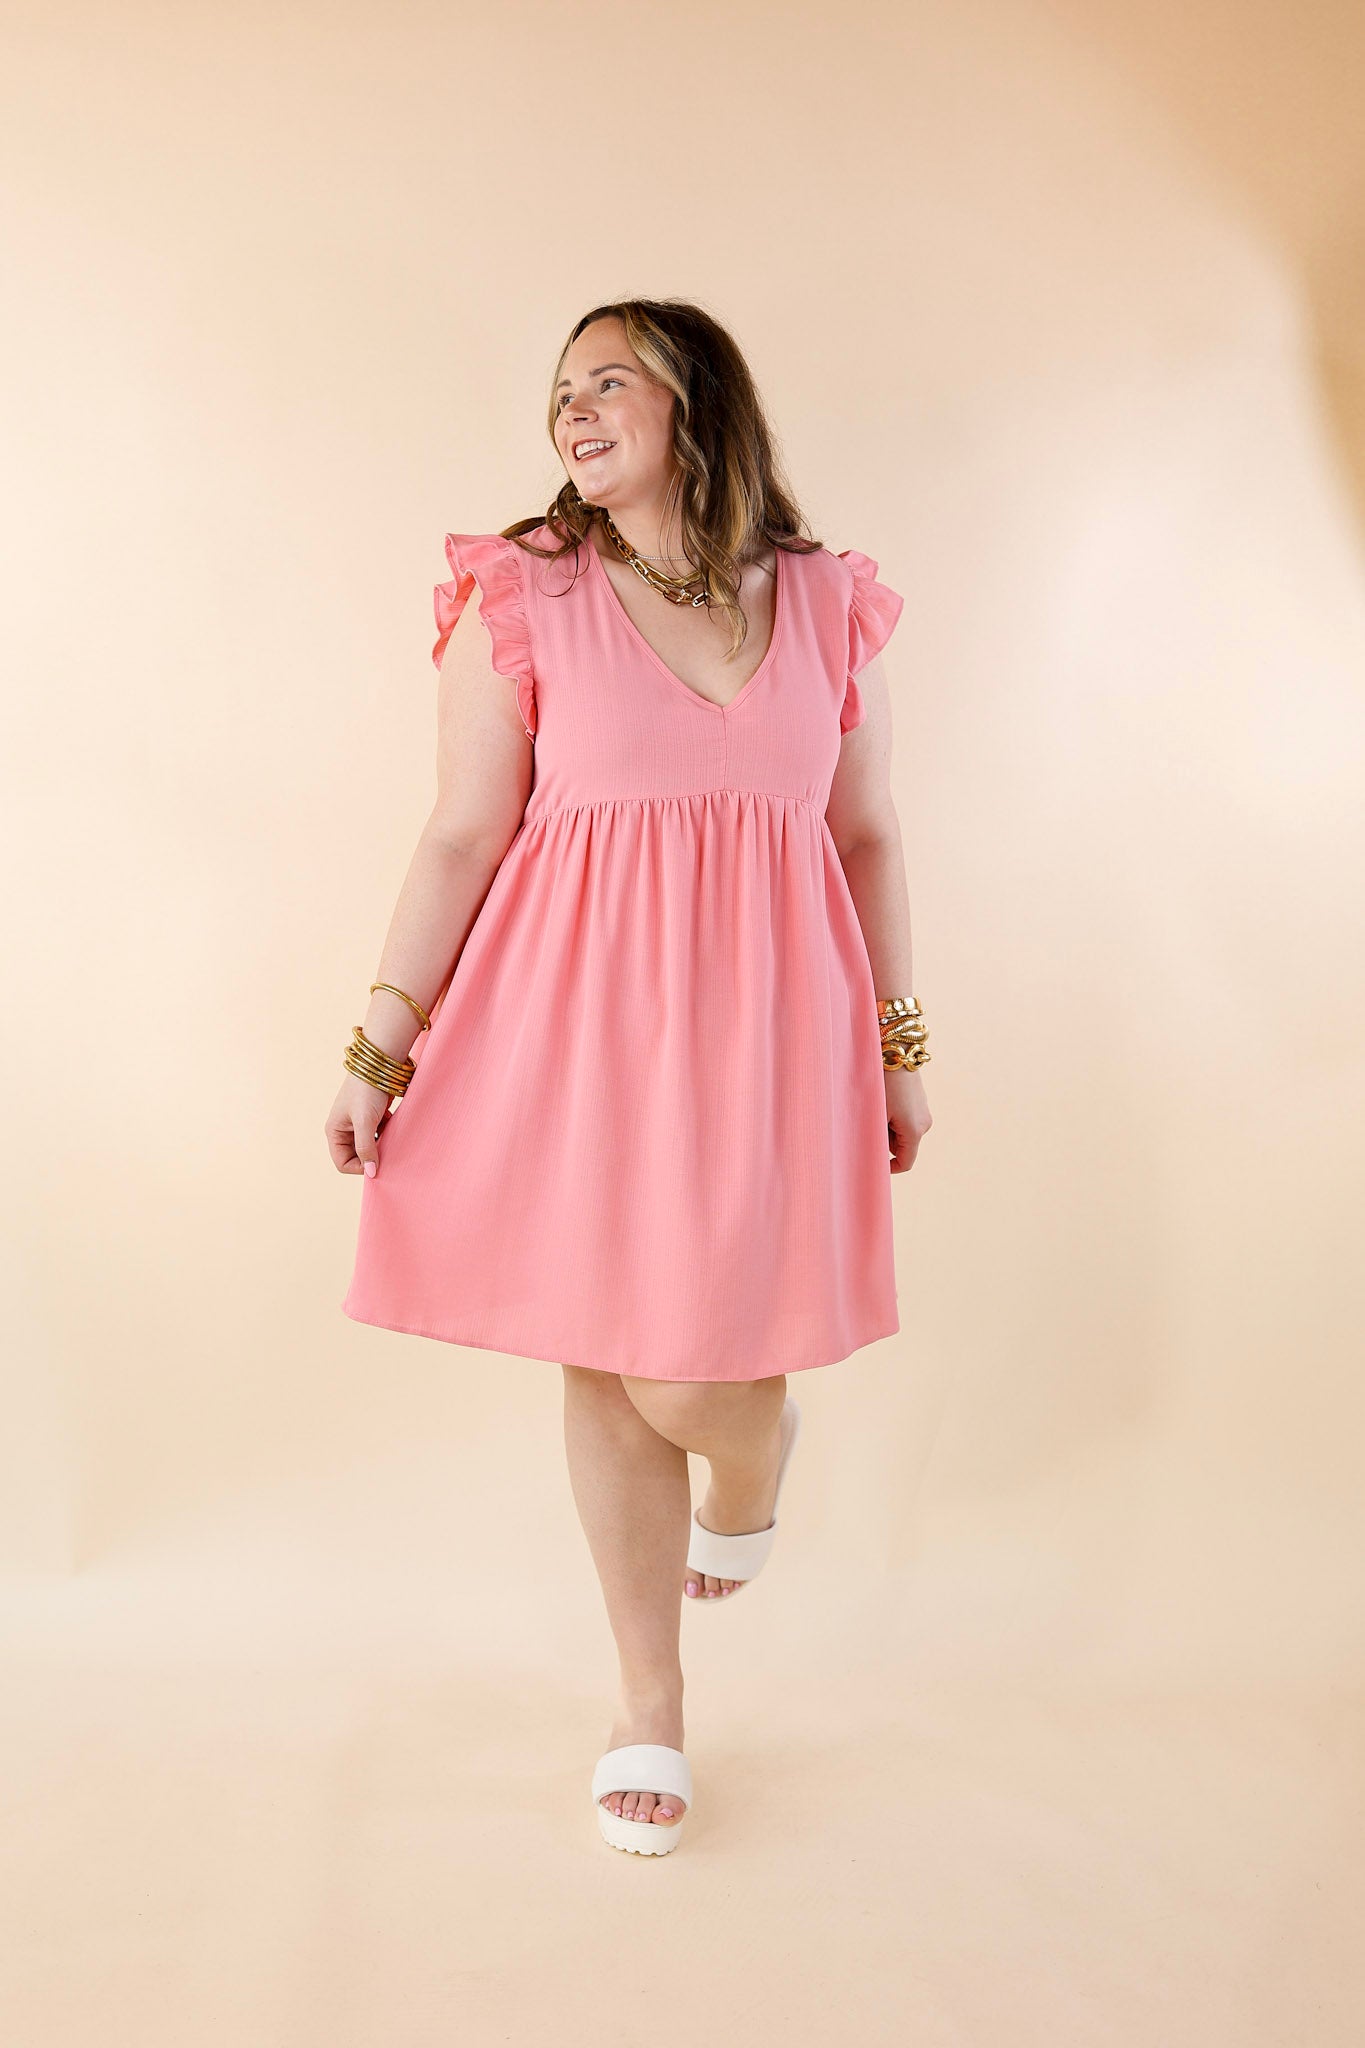 Capture Your Attention V Neck Dress with Ruffle Cap Sleeves in Bubblegum Pink - Giddy Up Glamour Boutique